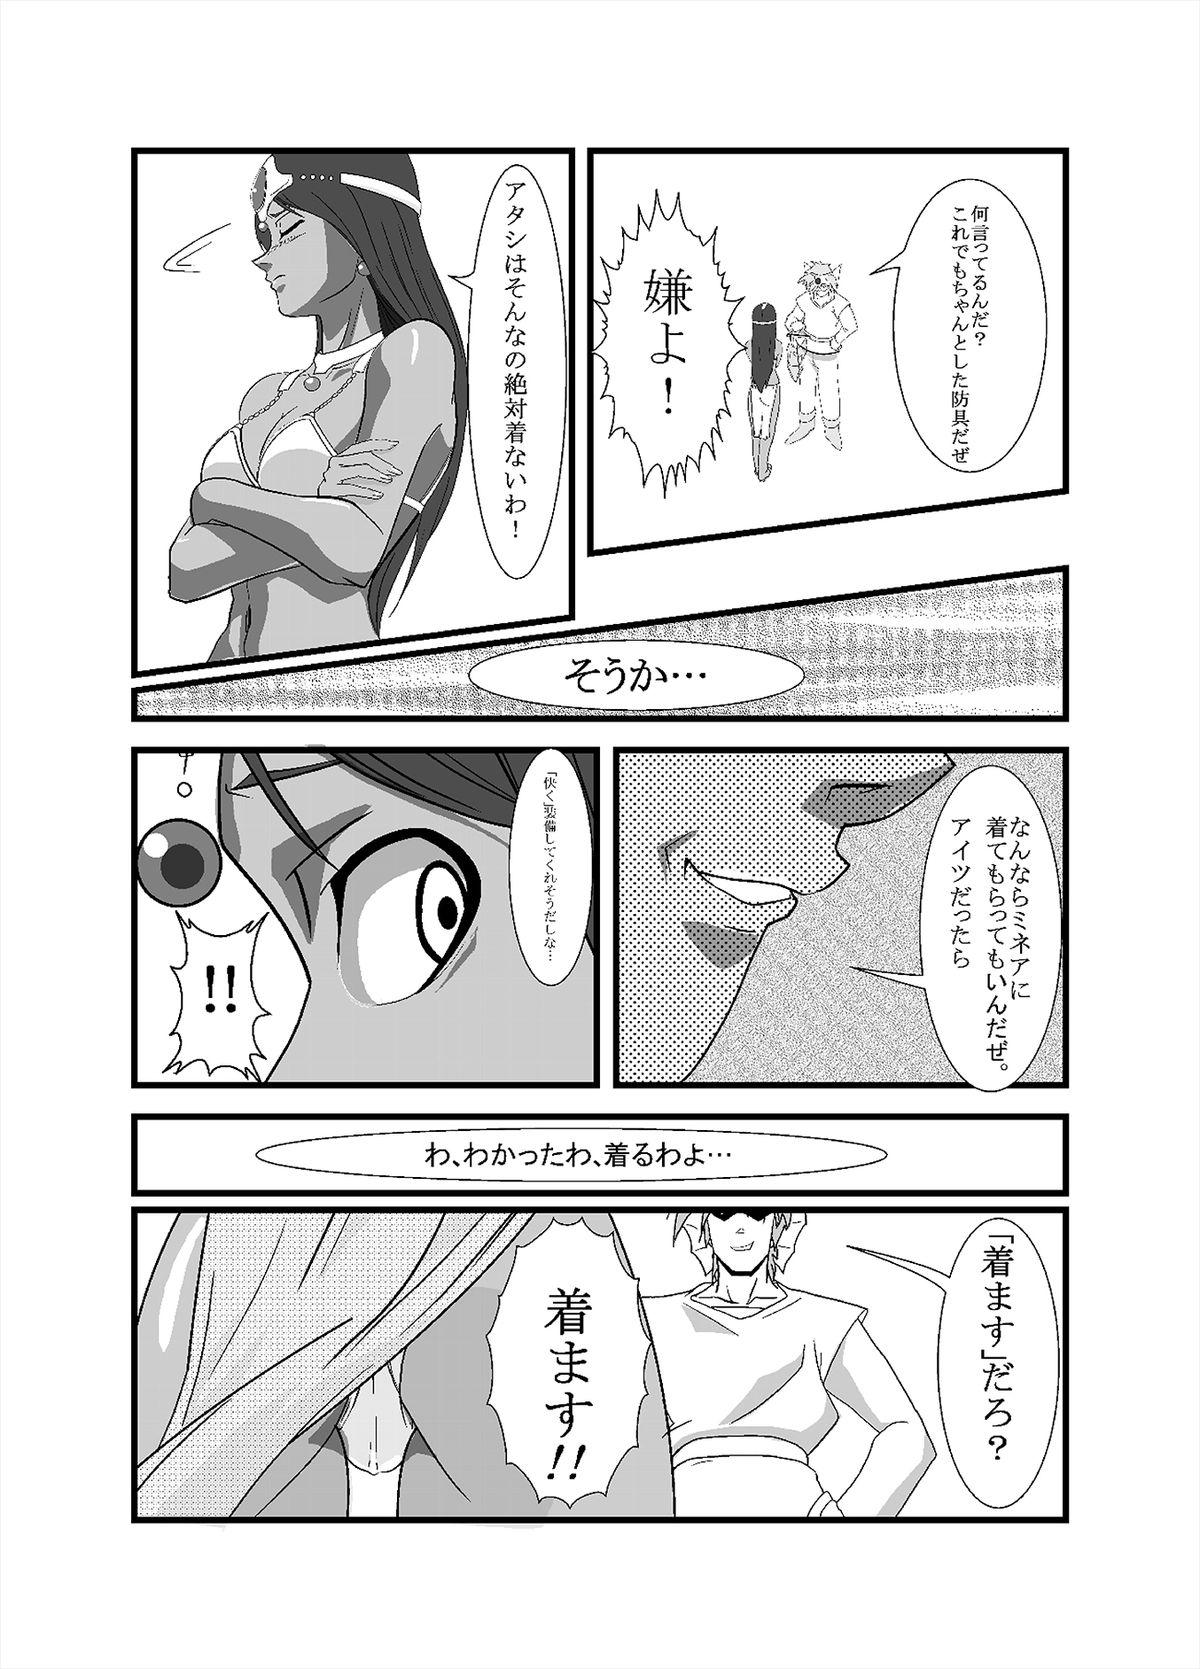 Exhibitionist Manya to Pink no Leotard - Dragon quest iv Boys - Page 5